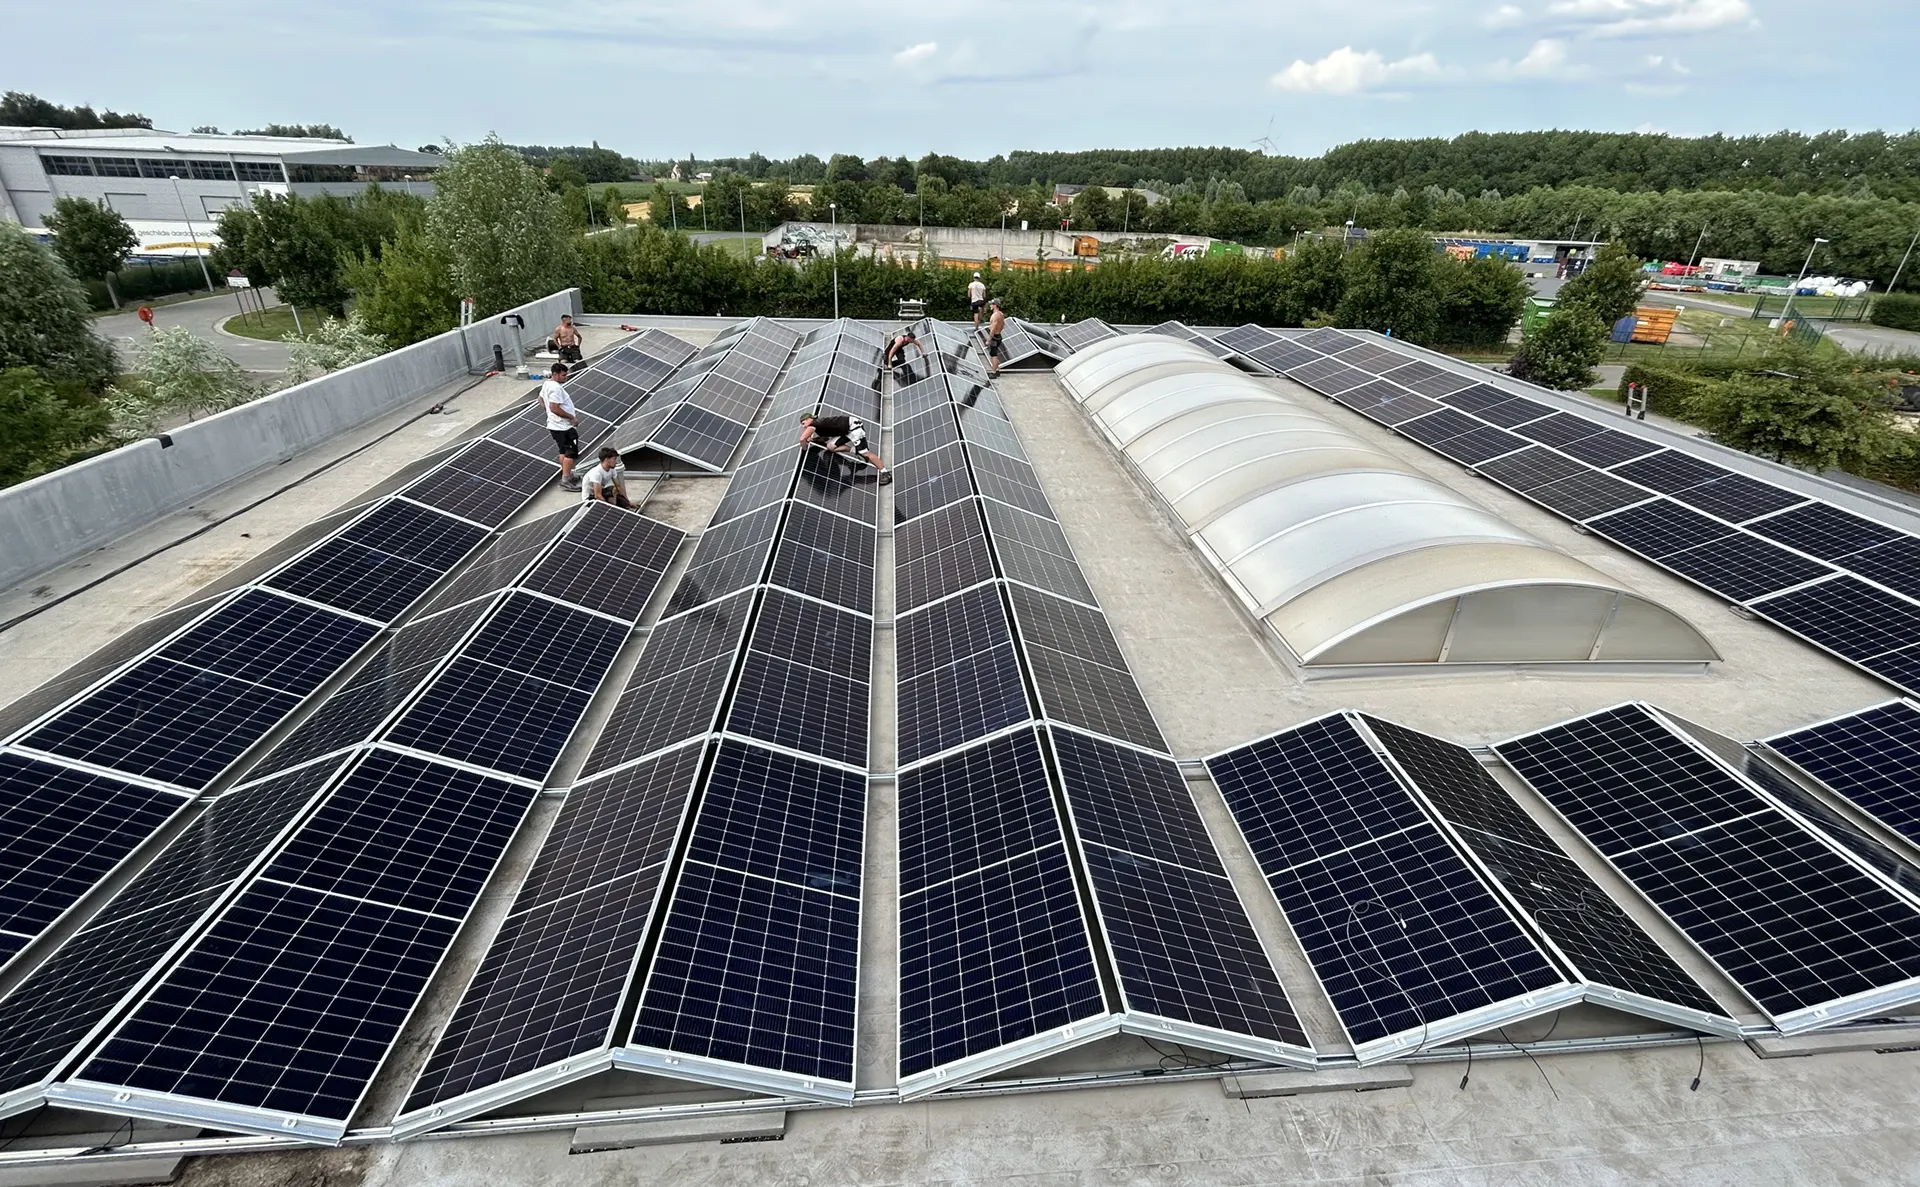 Empower your industry with clean energy - Elevate your business sustainability with solar panels tailored to your needs